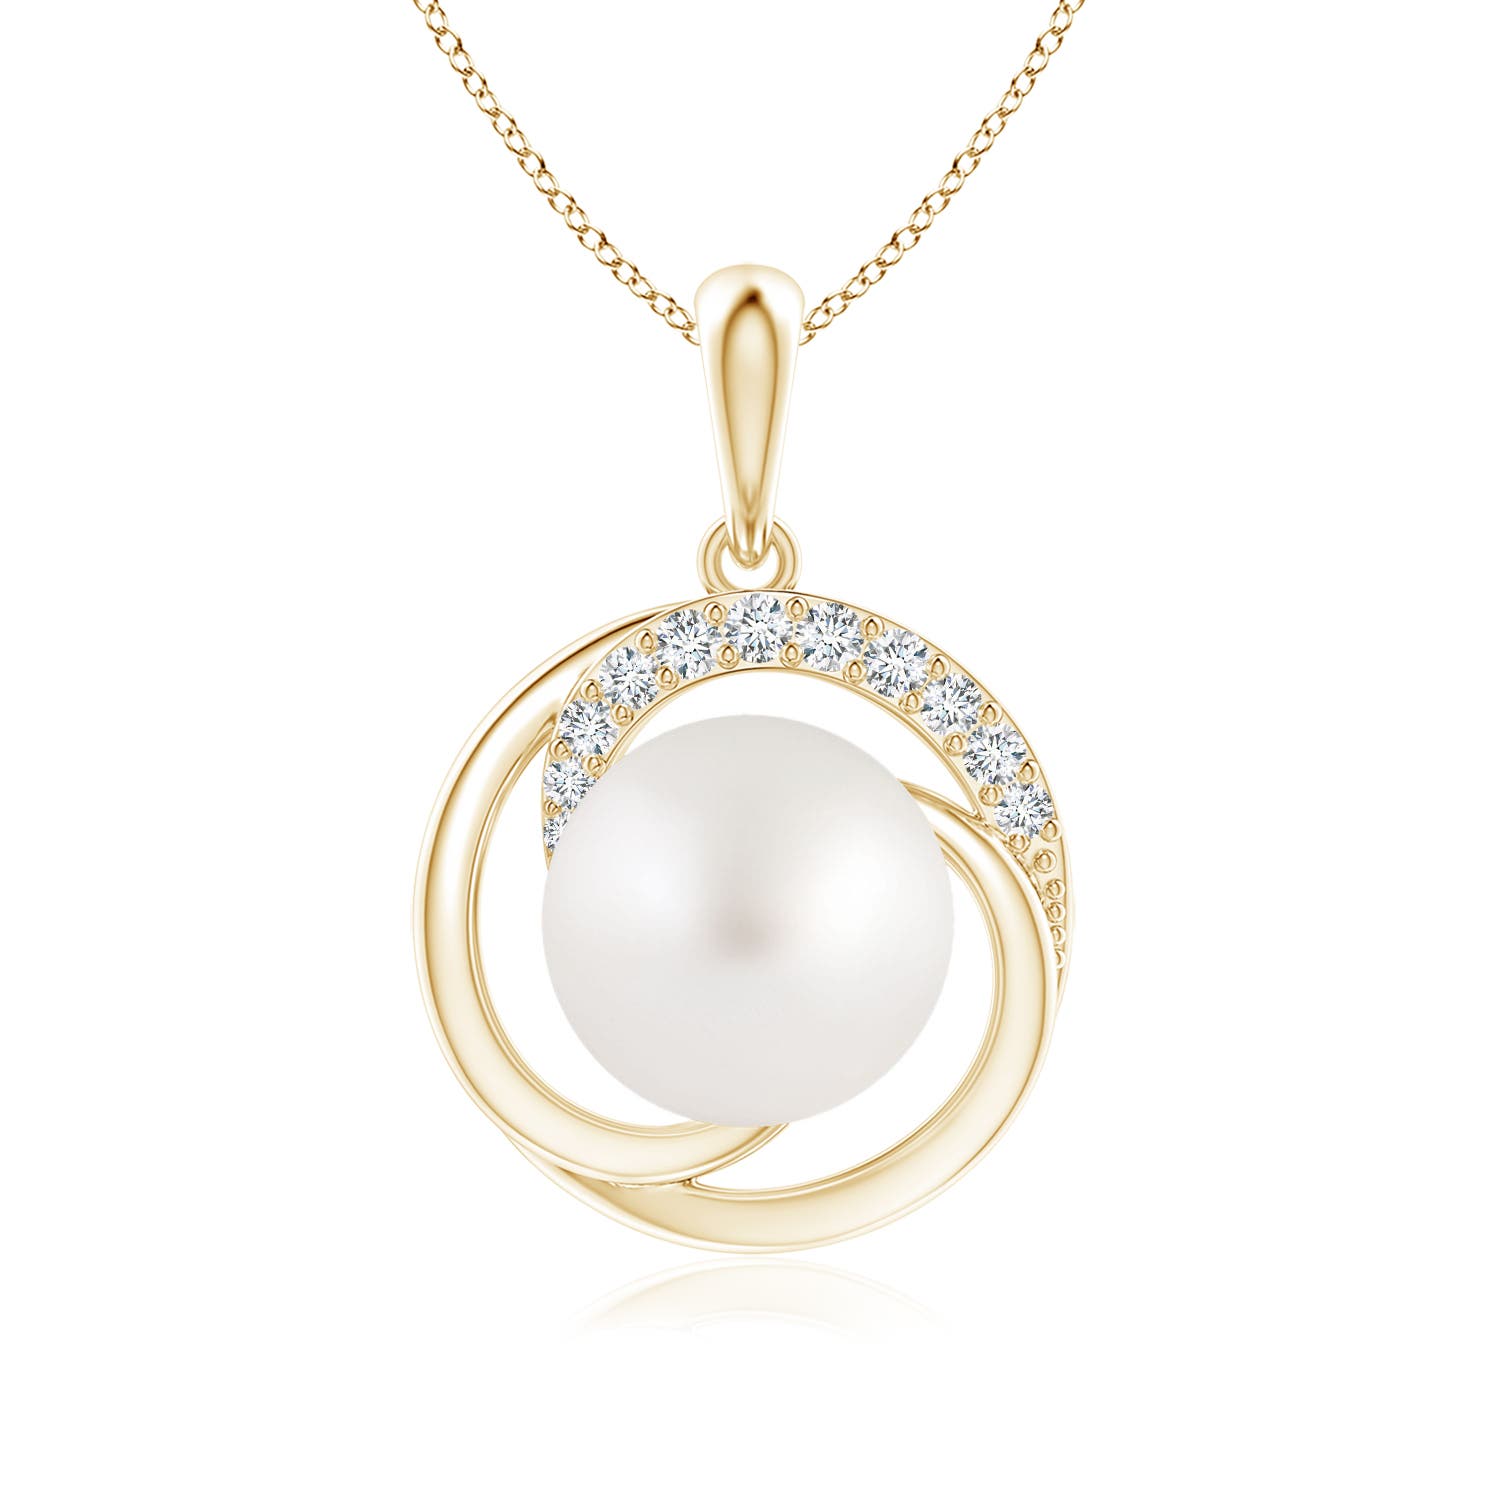 AA - South Sea Cultured Pearl / 5.36 CT / 14 KT Yellow Gold